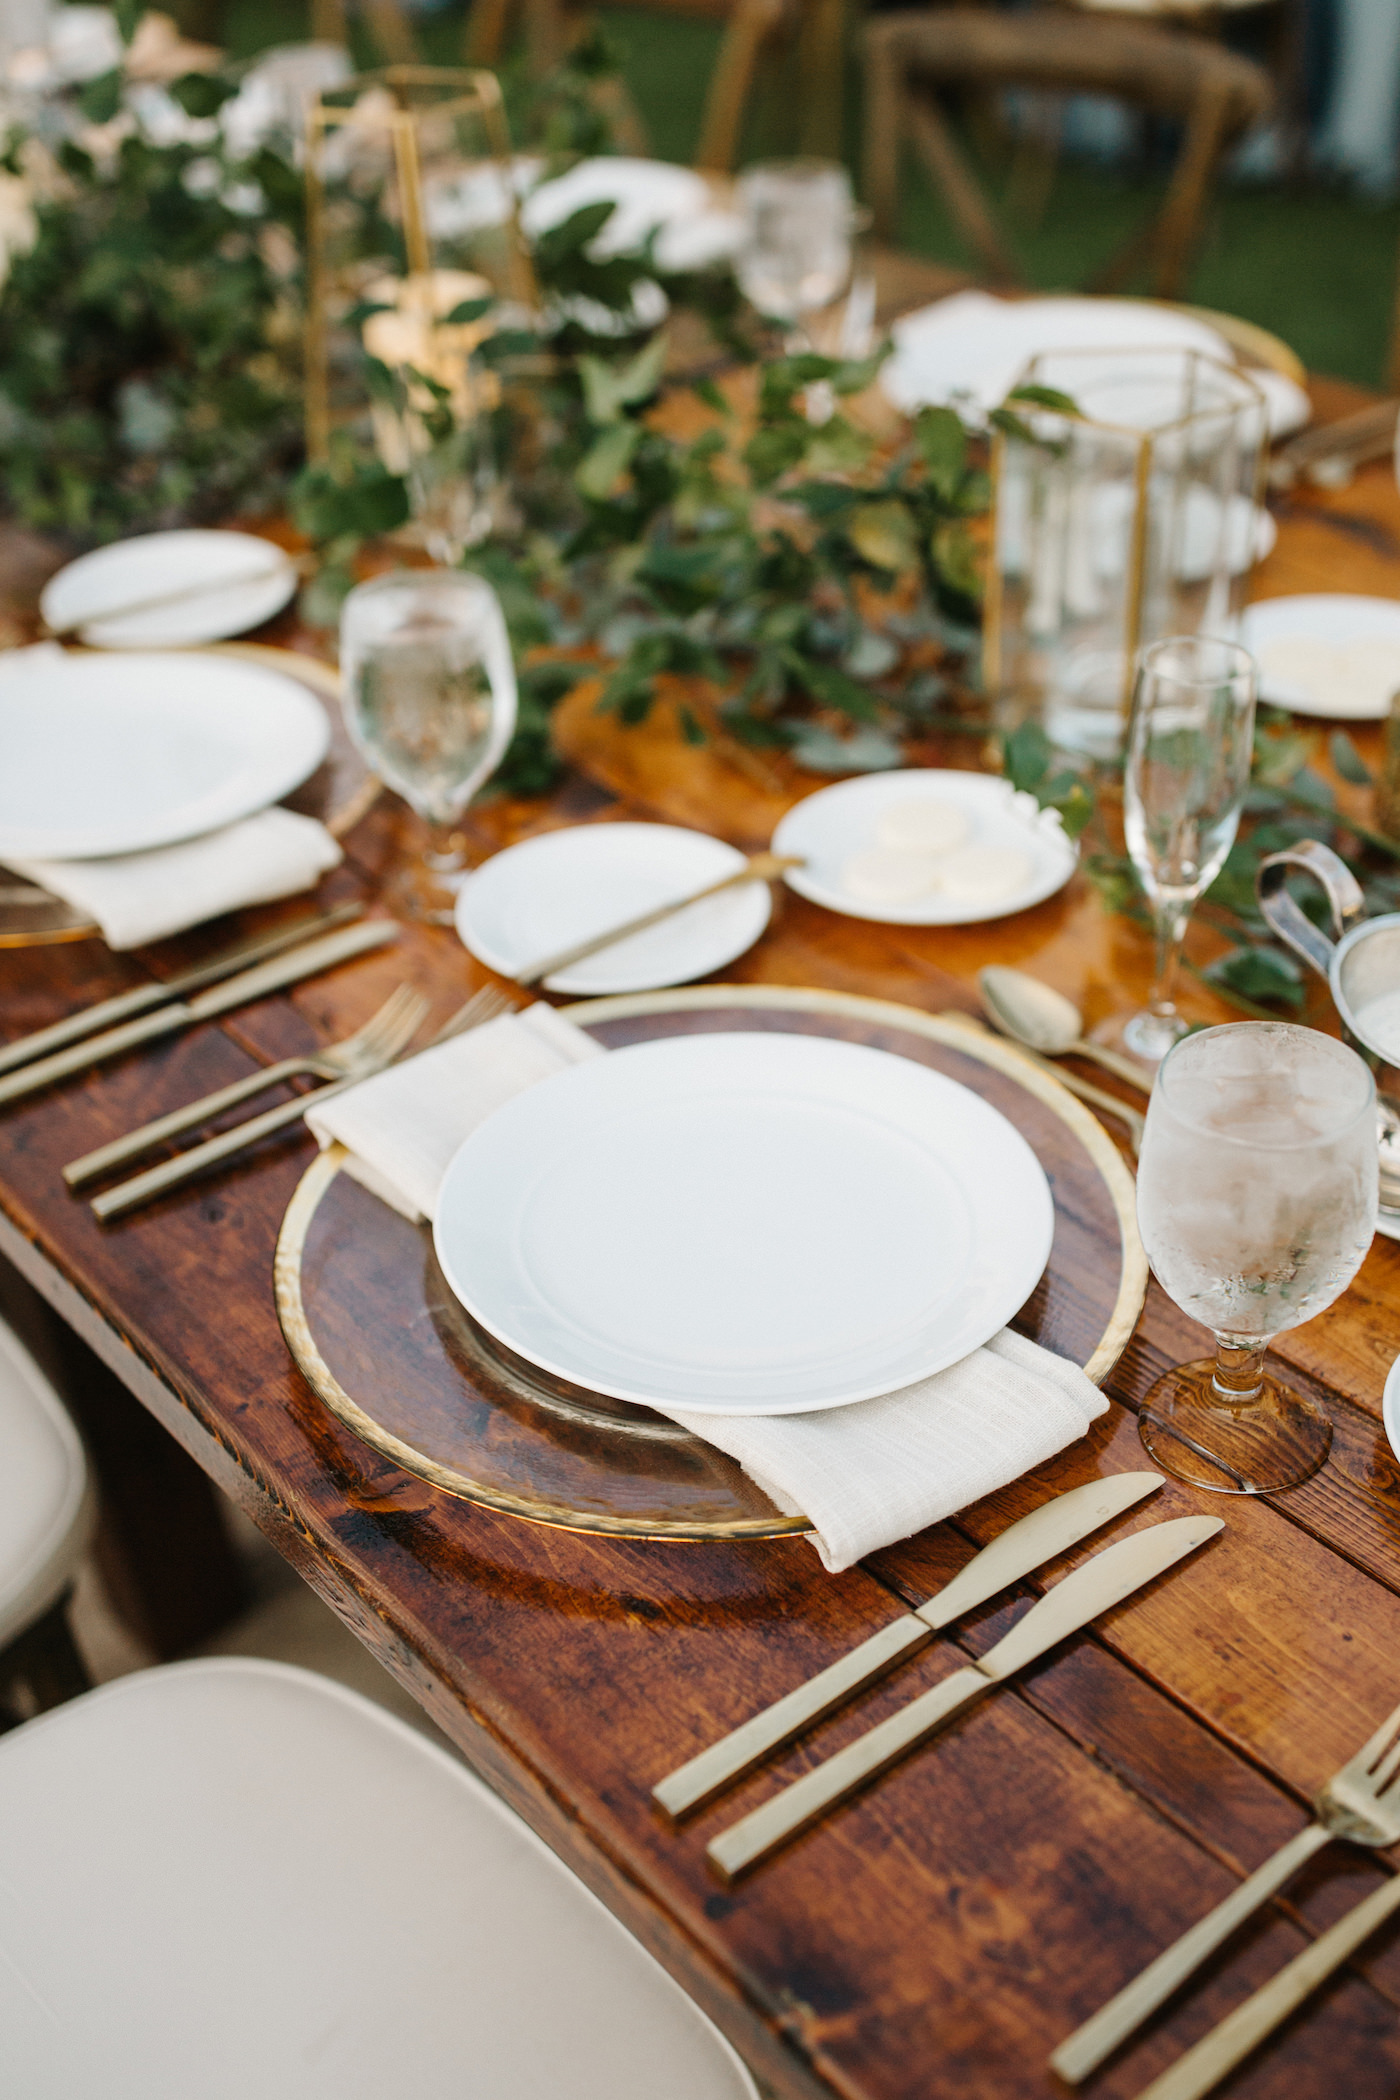 Bohemian Beach Inspired Wedding Reception and Decor, Wedding Party Farmhouse Feasting Table with Greenery Garland Centerpieces, Geometric Modern Vases, Clear Chargers with Gold Rim Detailing and Gold Flatware | Tampa Bay Luxury Wedding Planner Parties A’ La Carte | Rentals A Chair Affair and Over the Top Rental Linens | Wedding DJ Grant Hemond and Associates